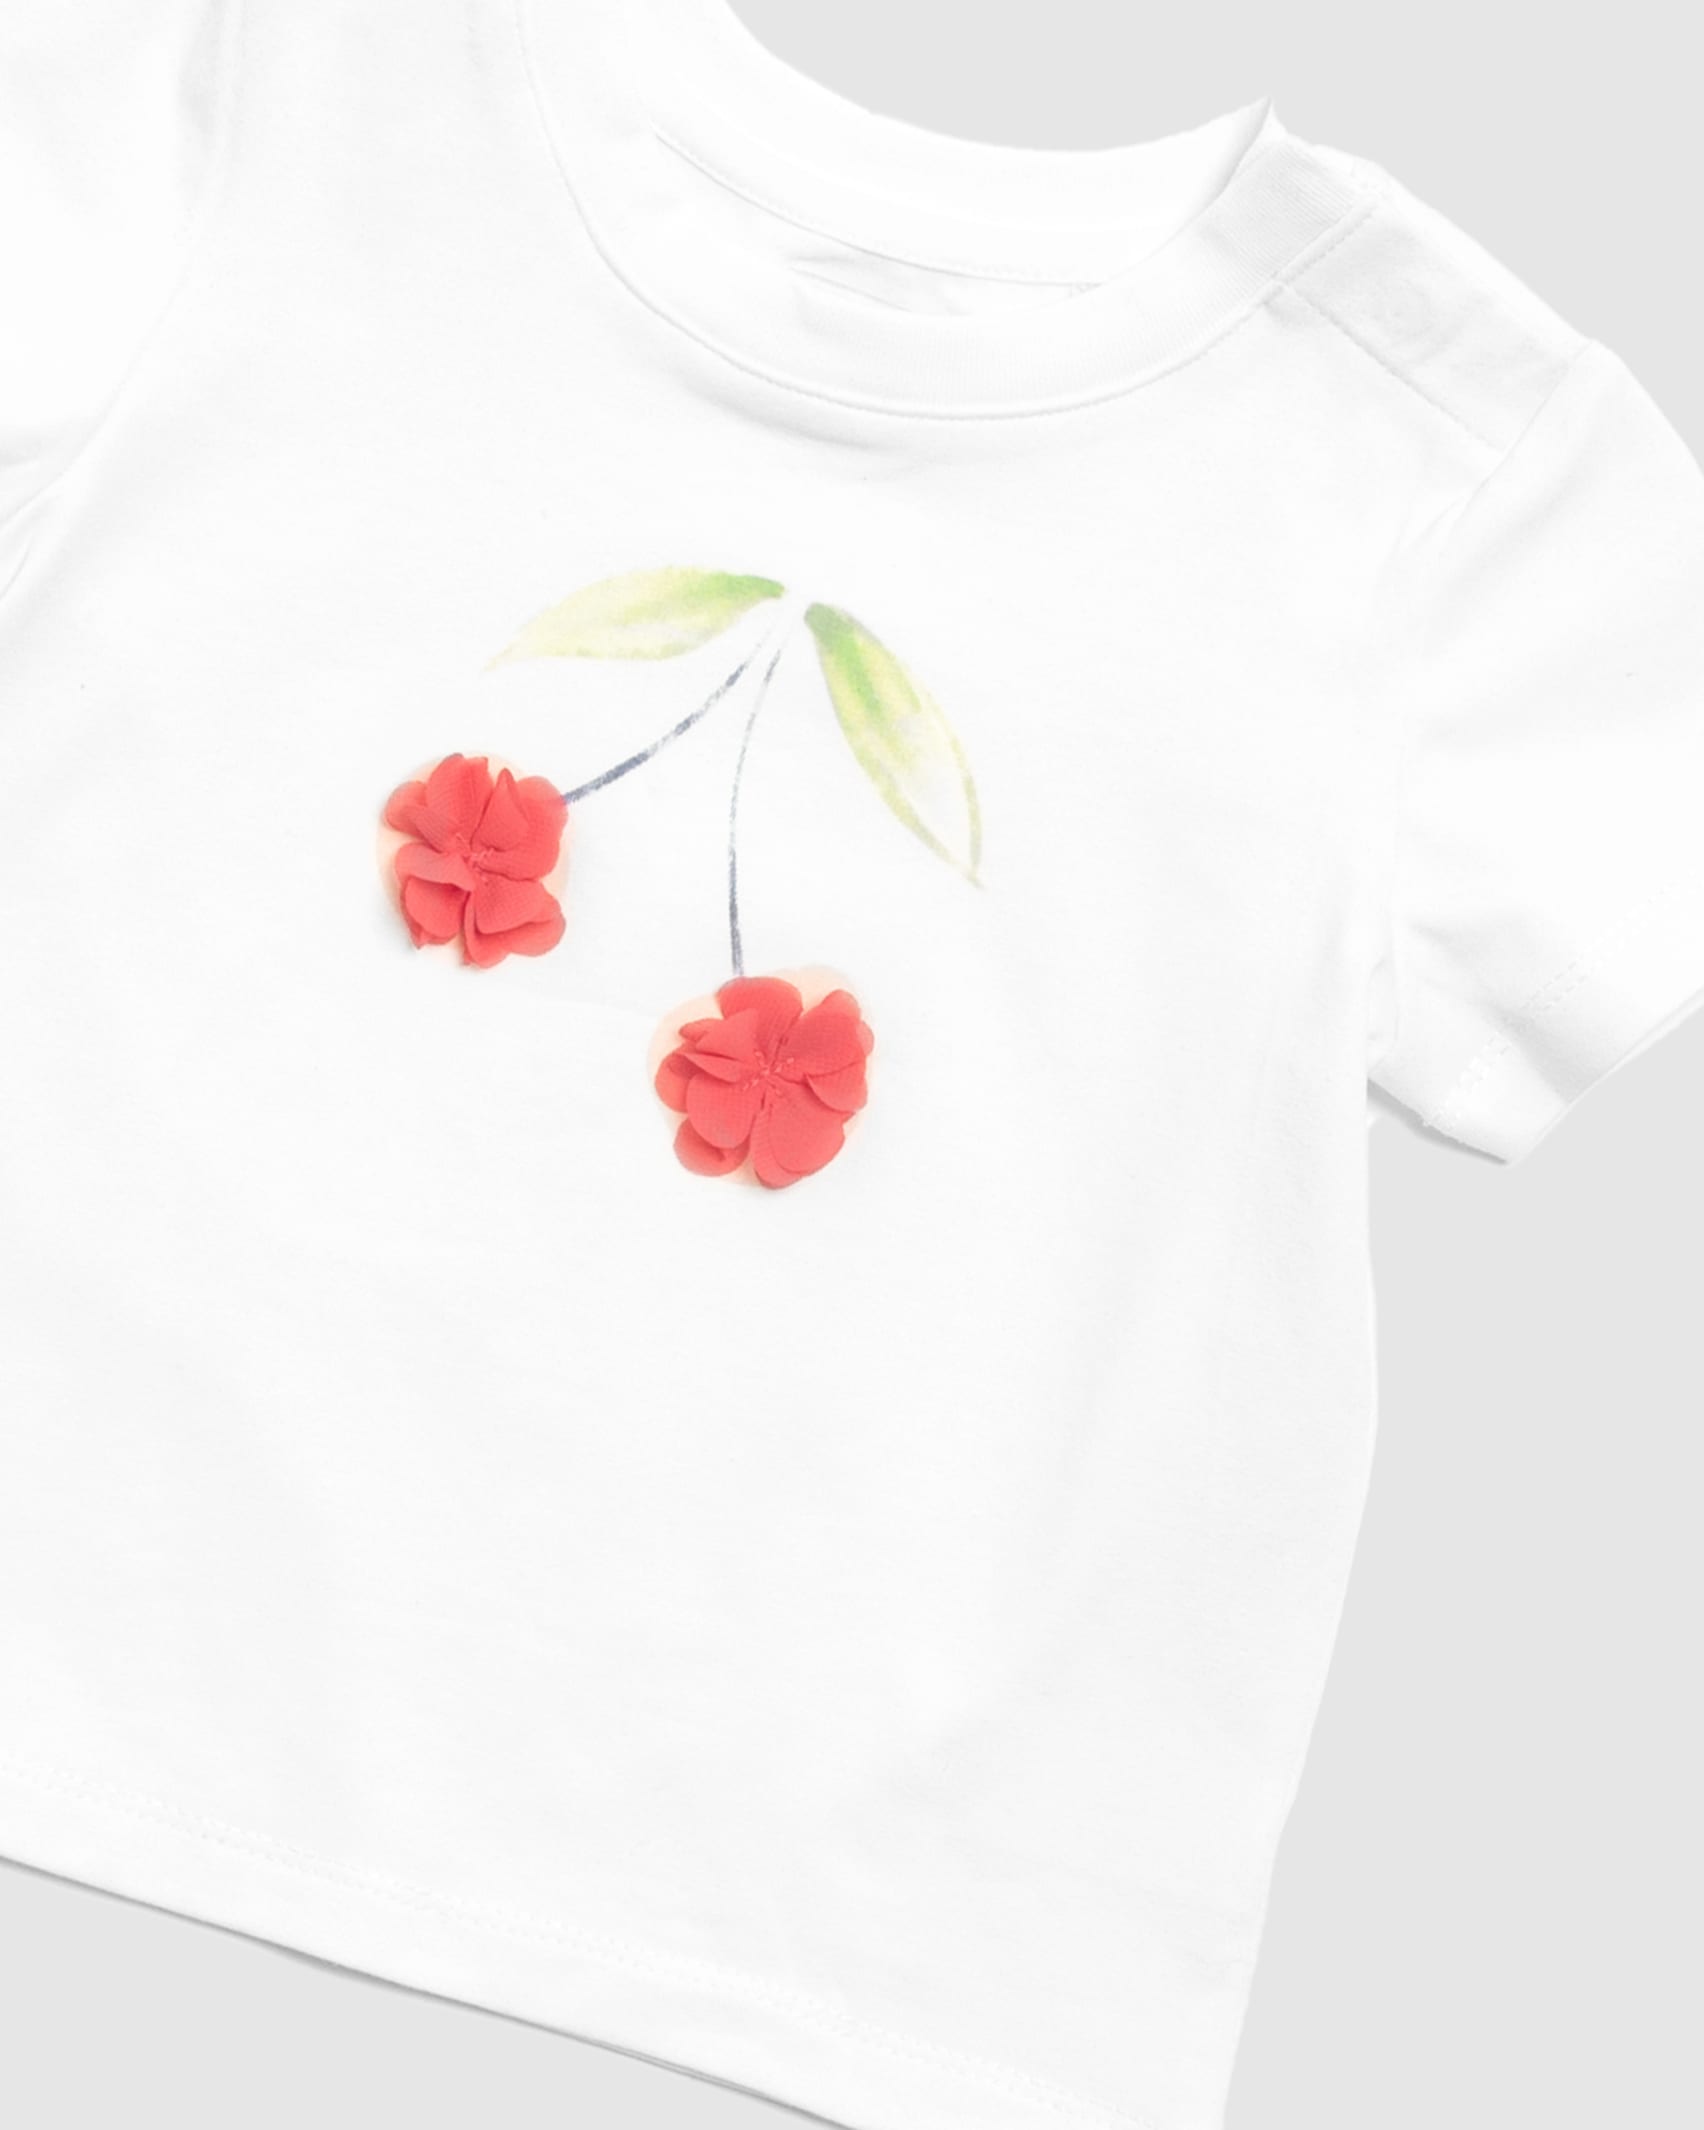 Lucy Floral Applique Baby Tee in WHITE